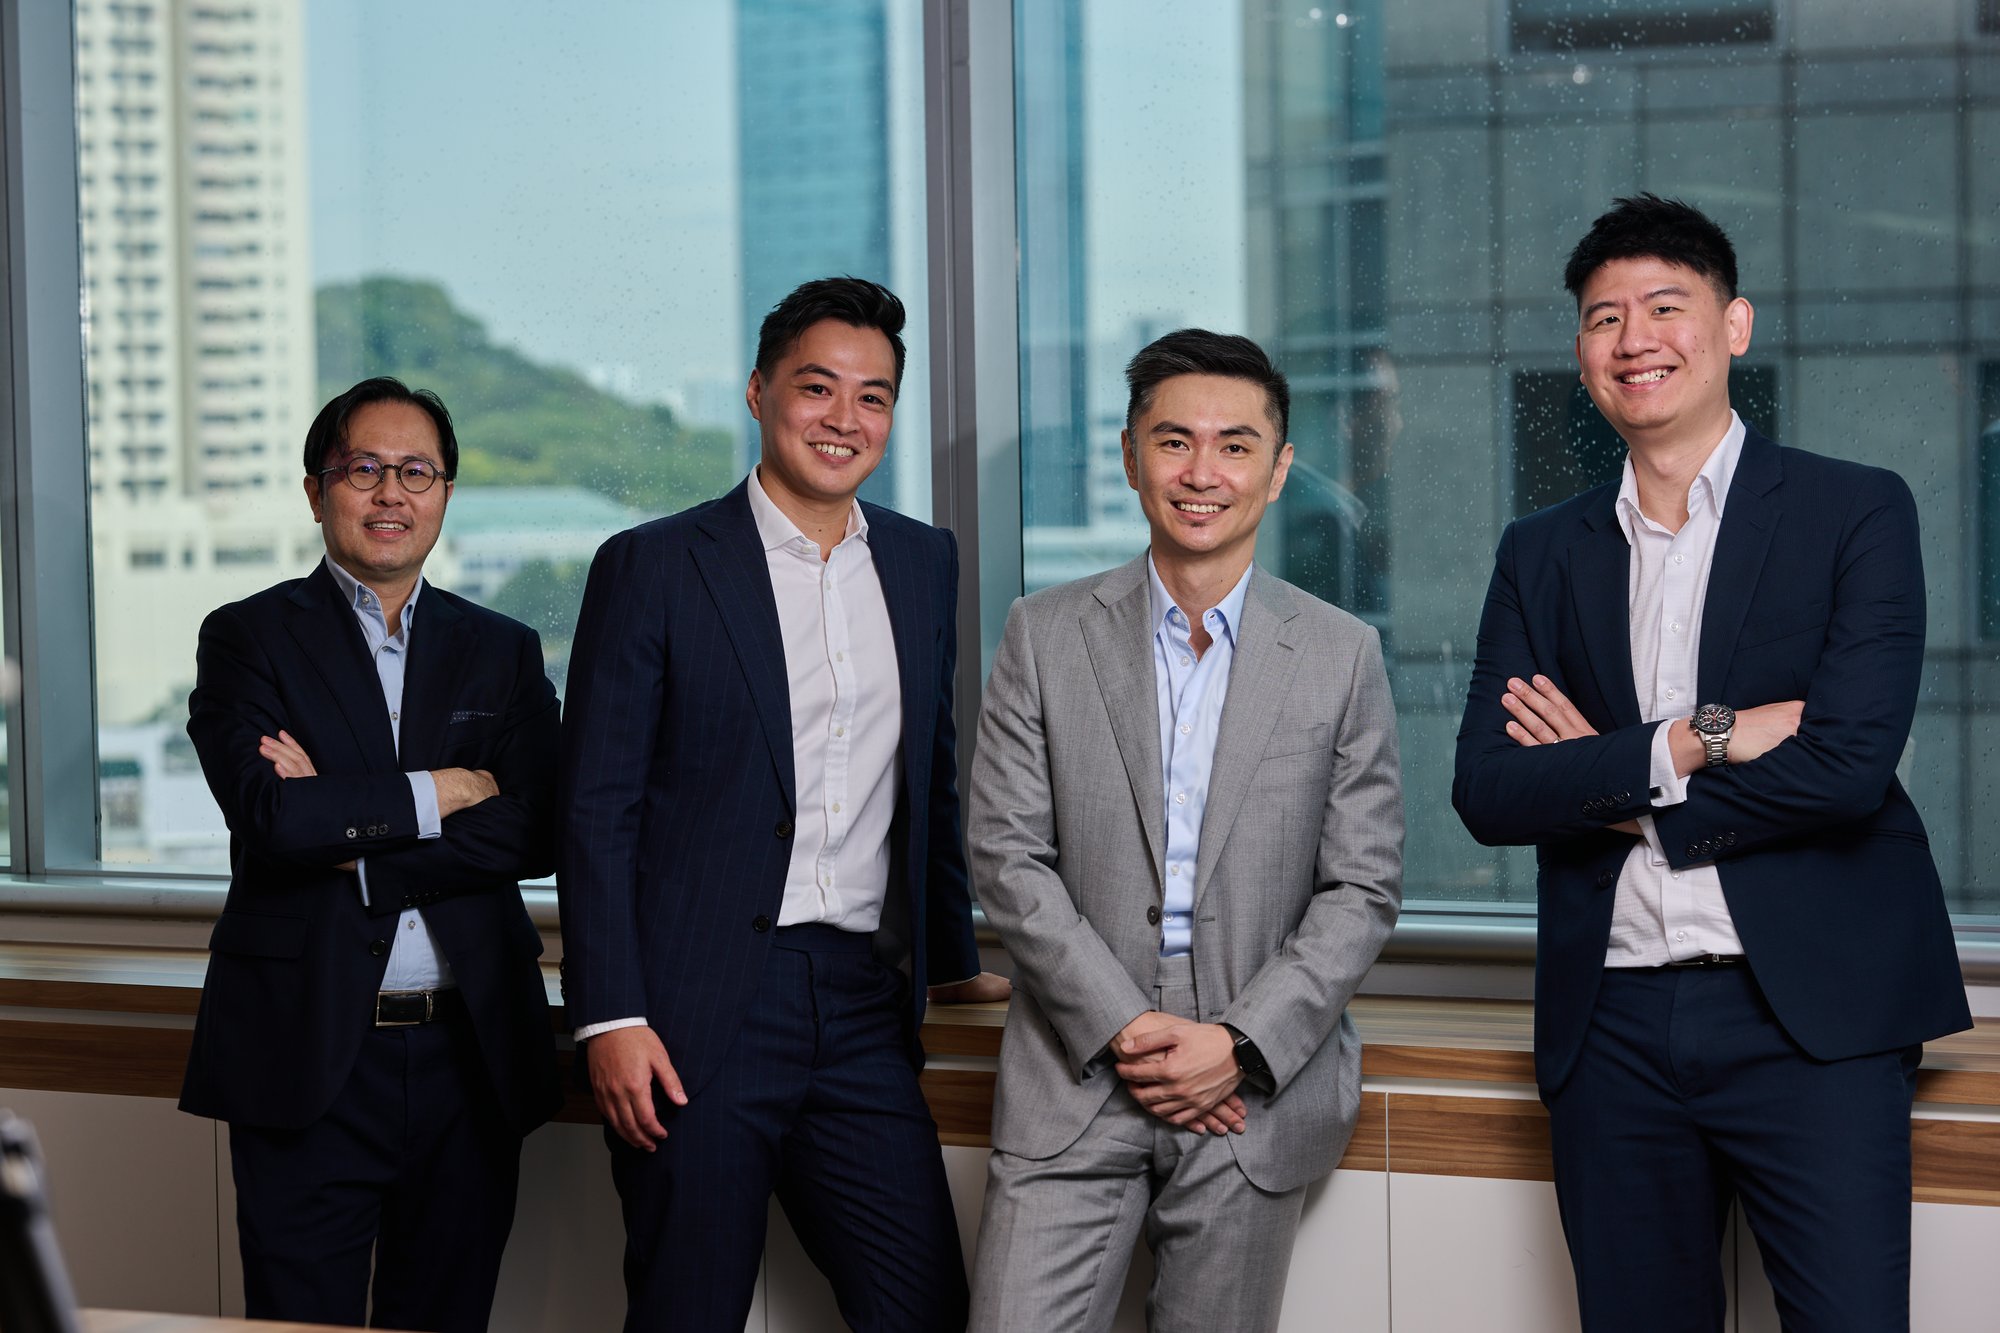 Aura Private Equity Singapore team standing together in with their arms crossed and leaning against a window